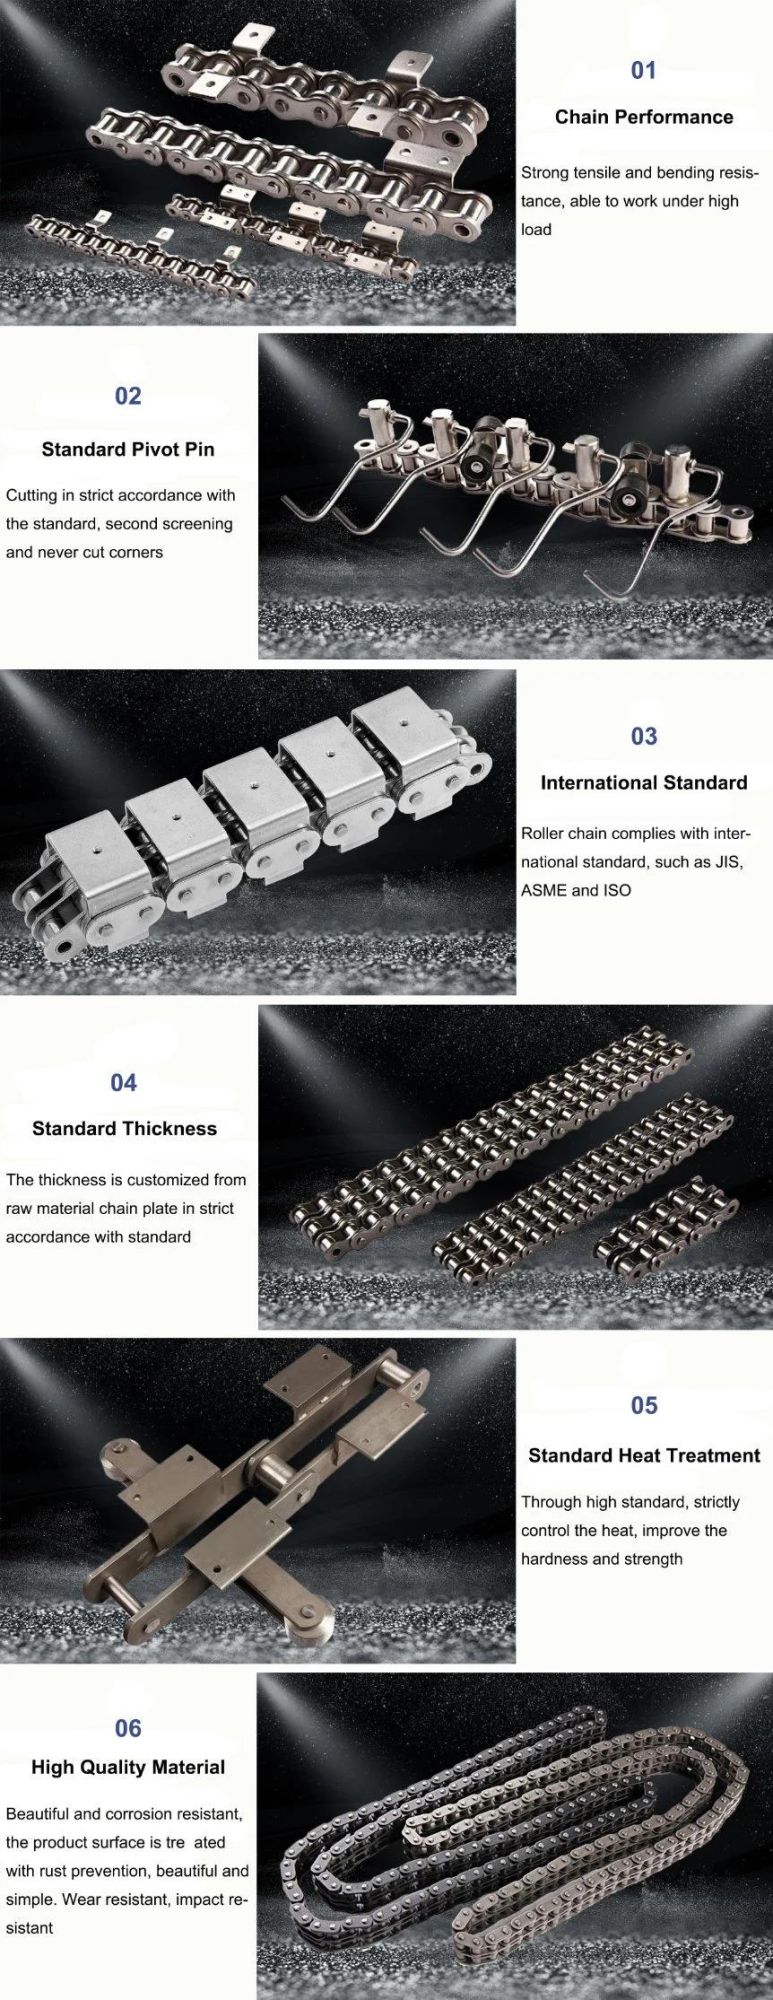 Large Supply Stainless Steel Conveyor Mesh Belts High Temperature Hoof Chains Great Wall Mesh Belt Chain